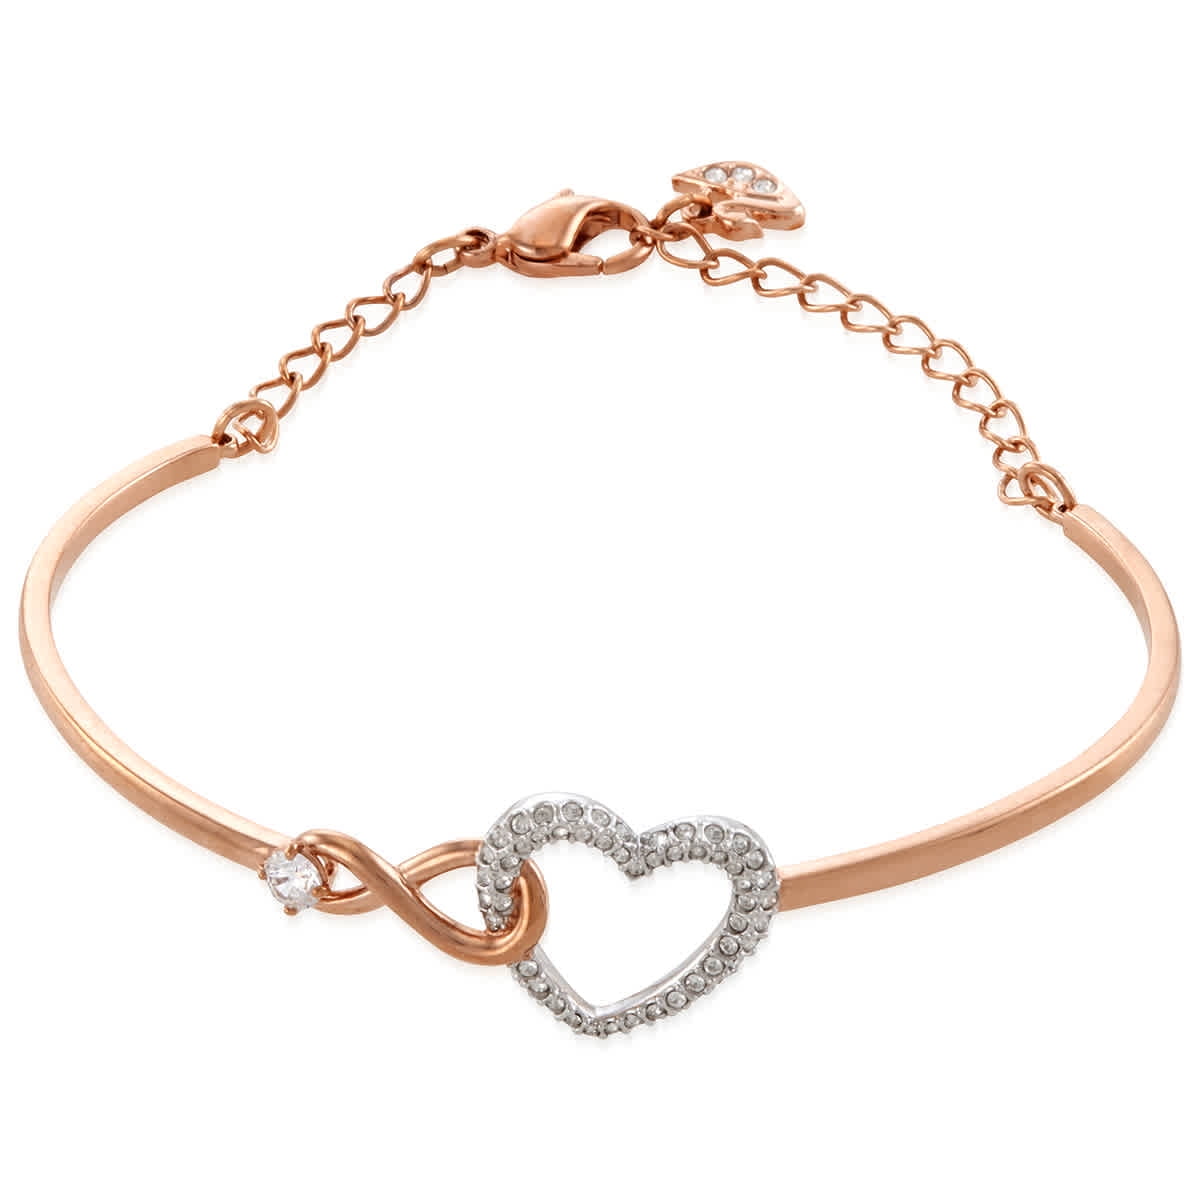 Mixed Metal Double Rope Bracelet | GUESS